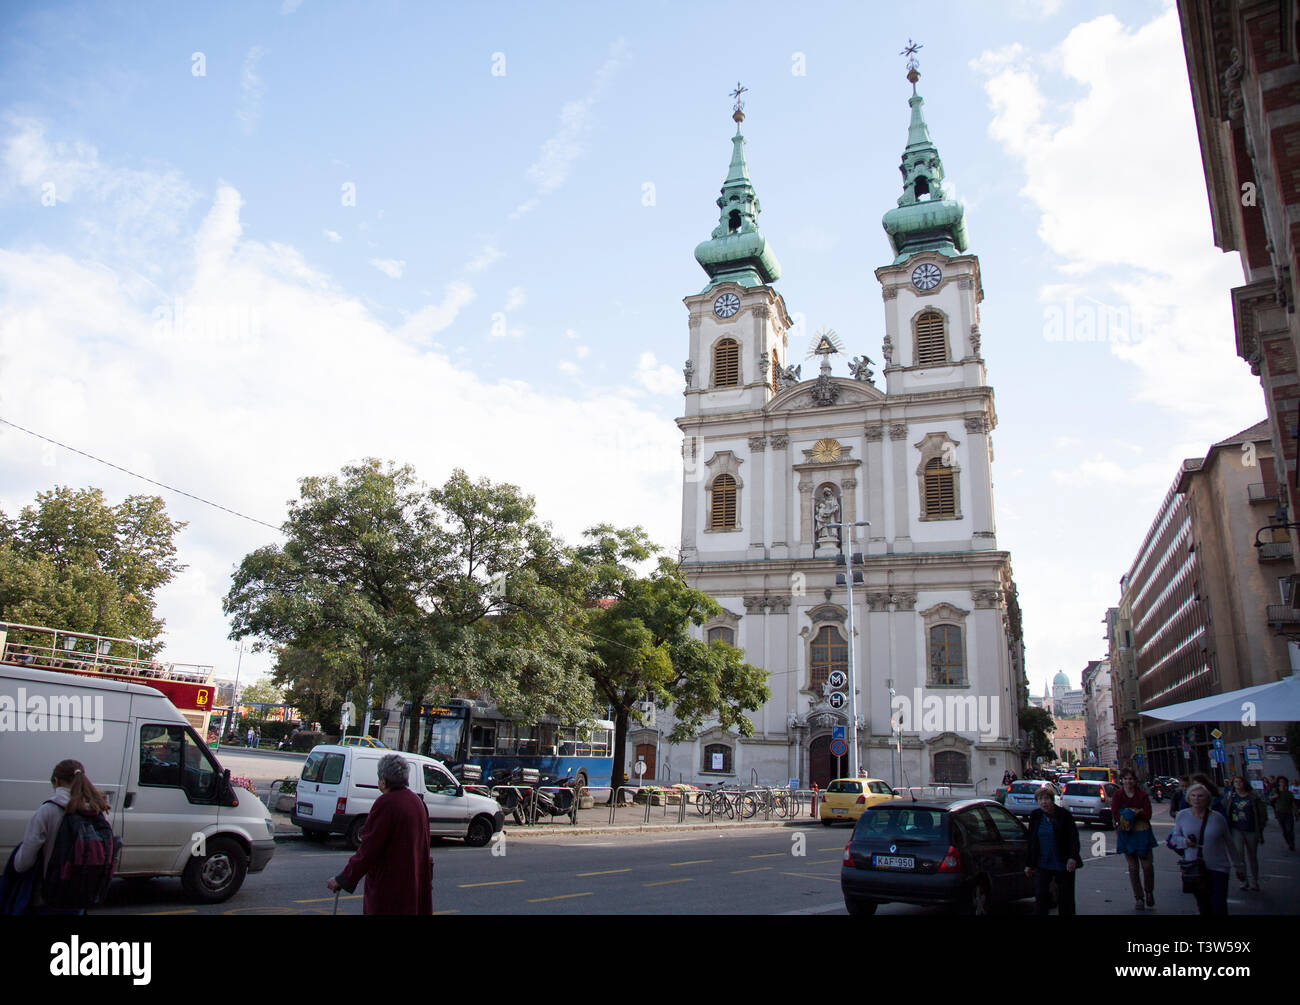 BUDAPEST, HUNGARY - SEPTEMBER 22, 2017: One of the main sights at Batthyány Square is the Church of St. Anne, one of the most beautiful Baroque church Stock Photo